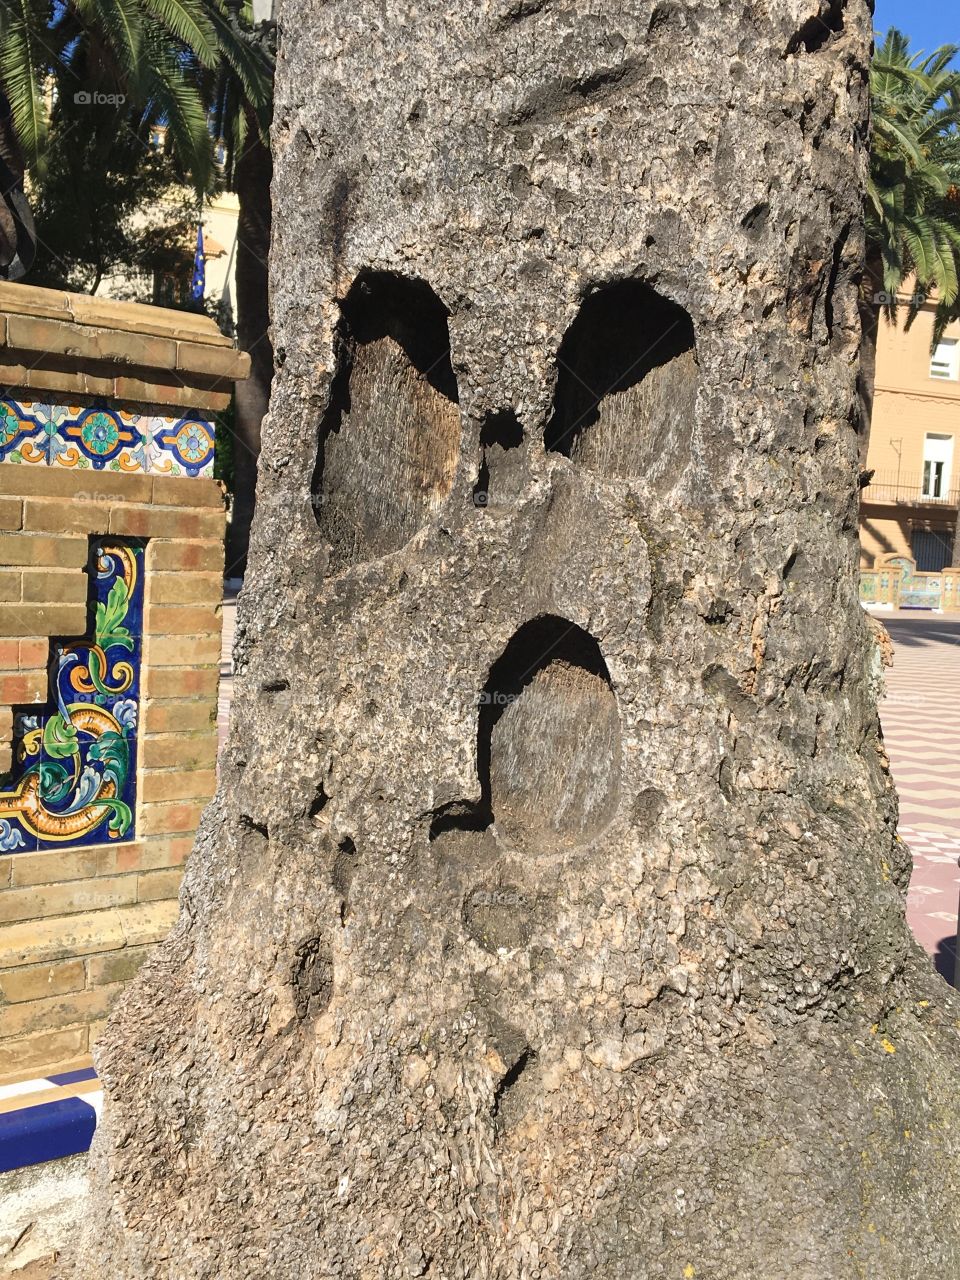 Seeing a Halloween face on a palm tree trunk makes me smile ! 